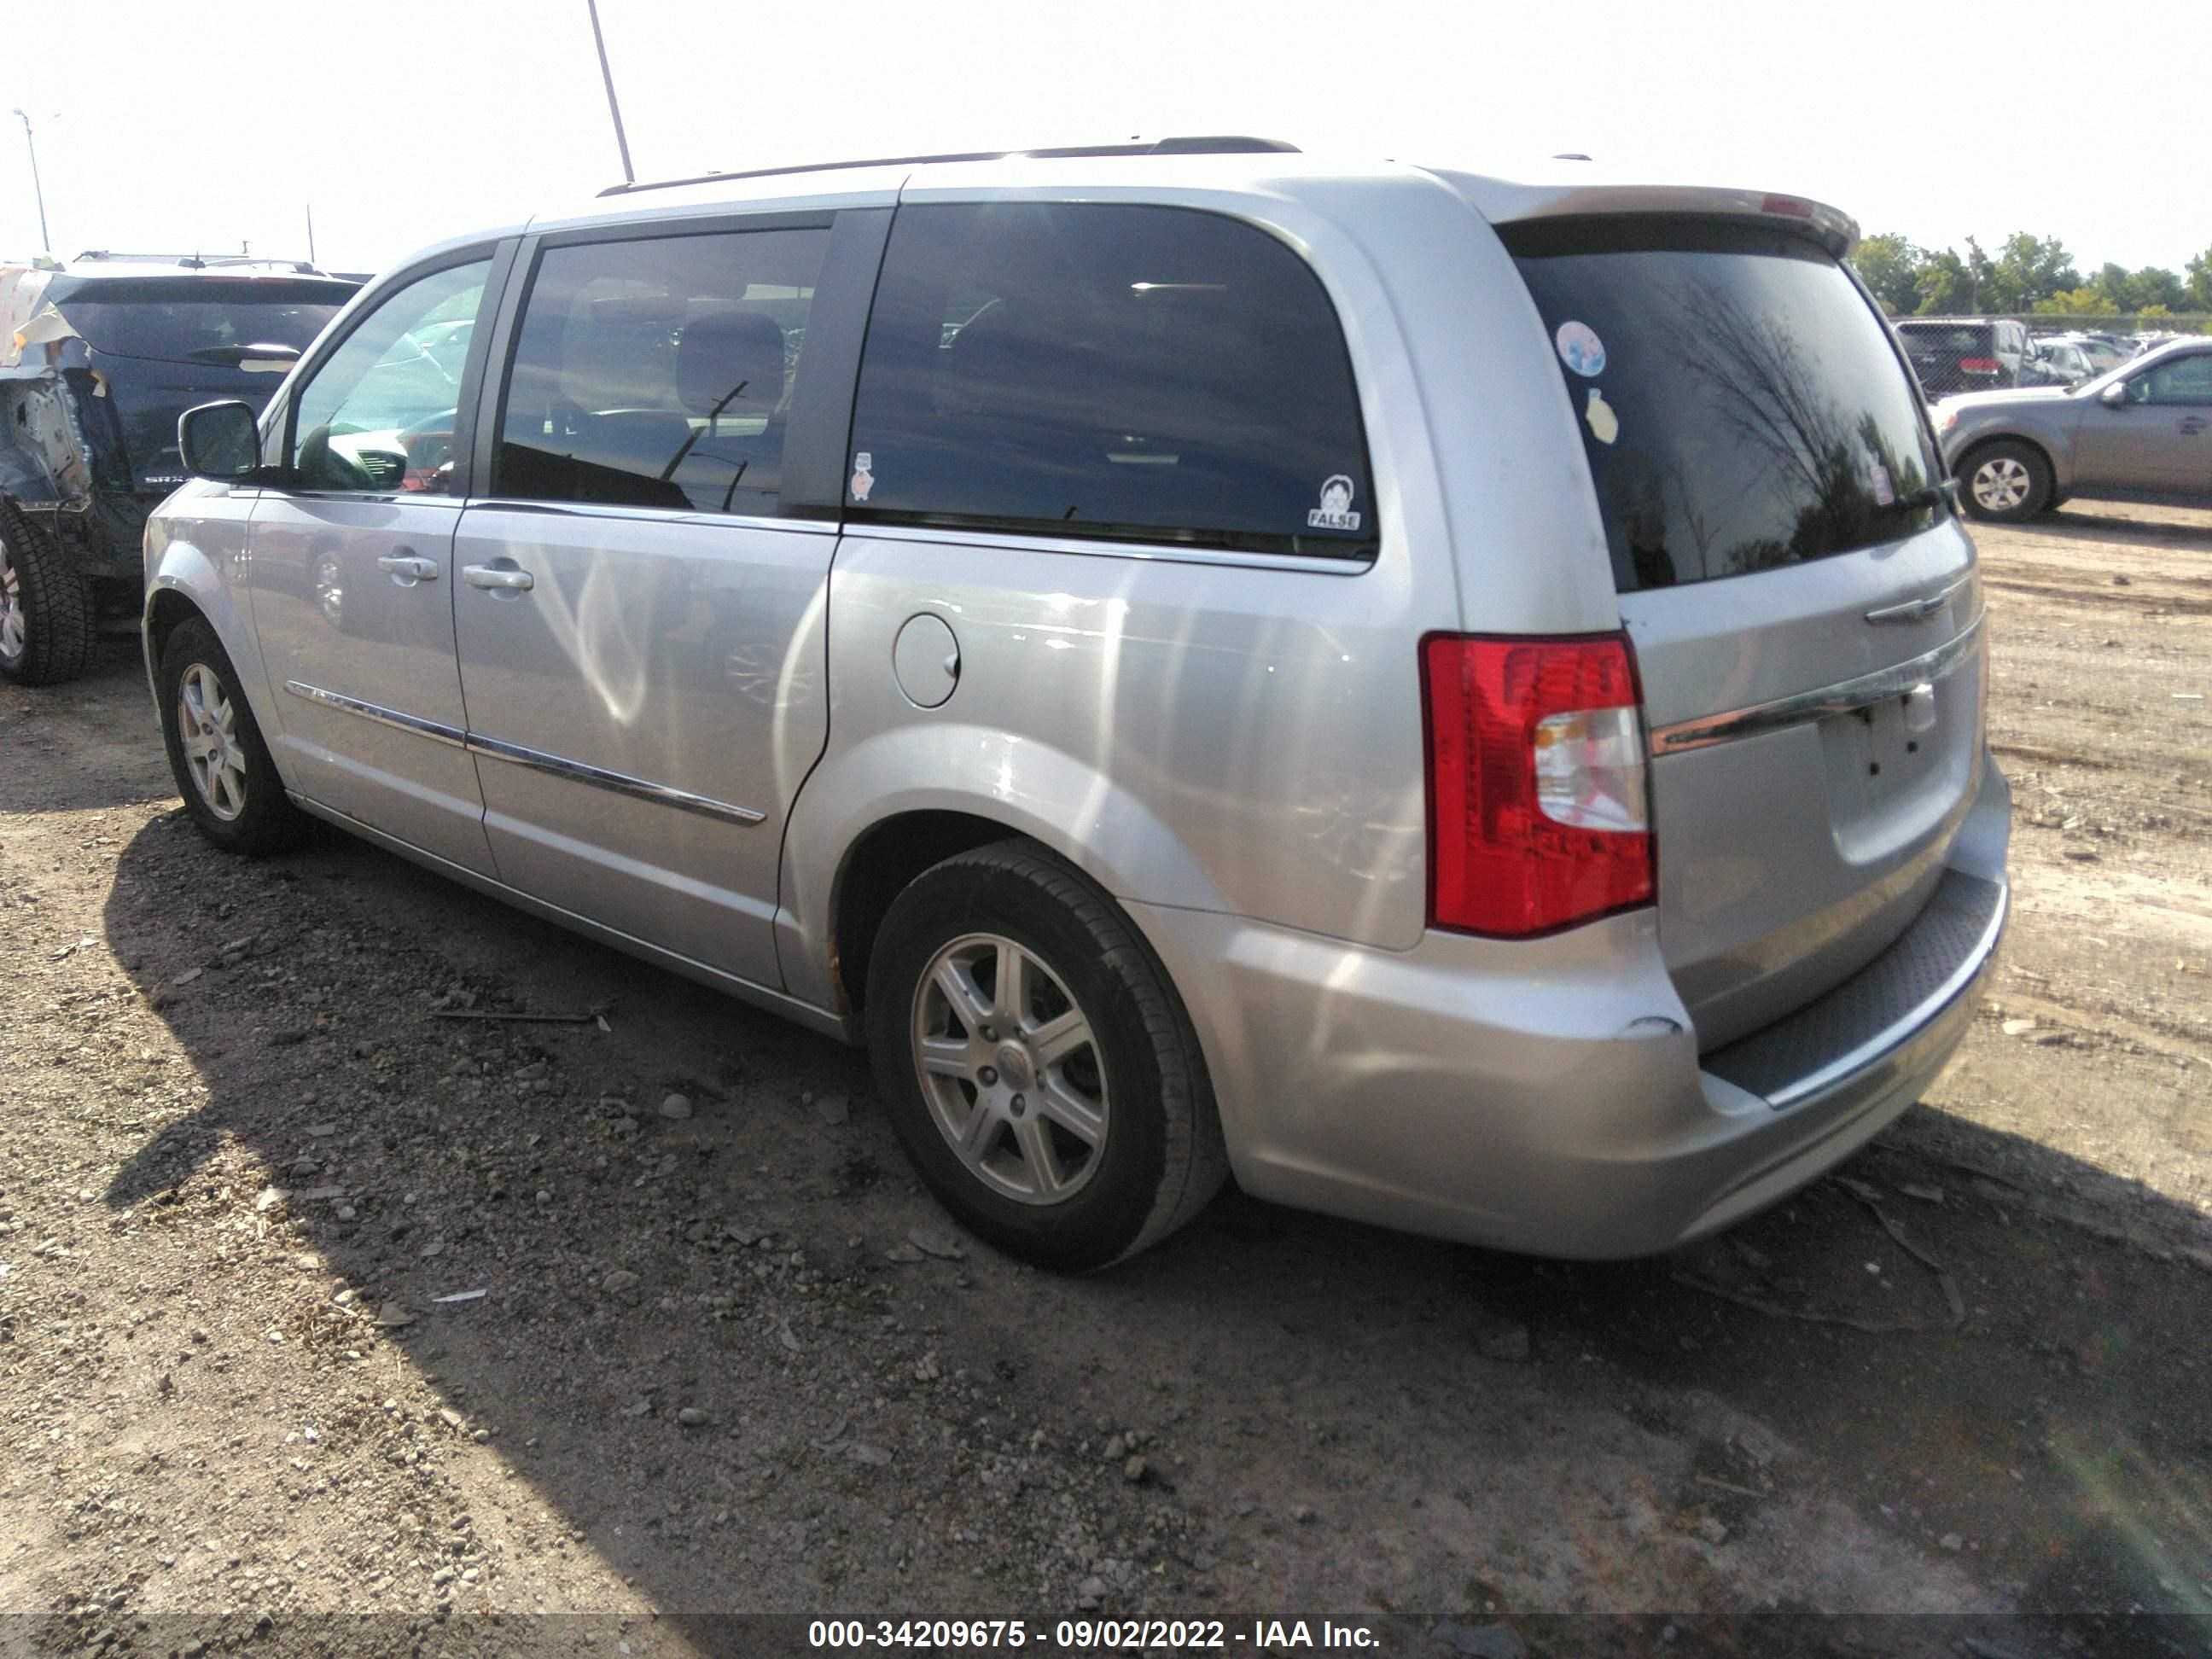 2011 CHRYSLER TOWN & COUNTRY TOURING VIN: 2A4RR5DG2BR747183